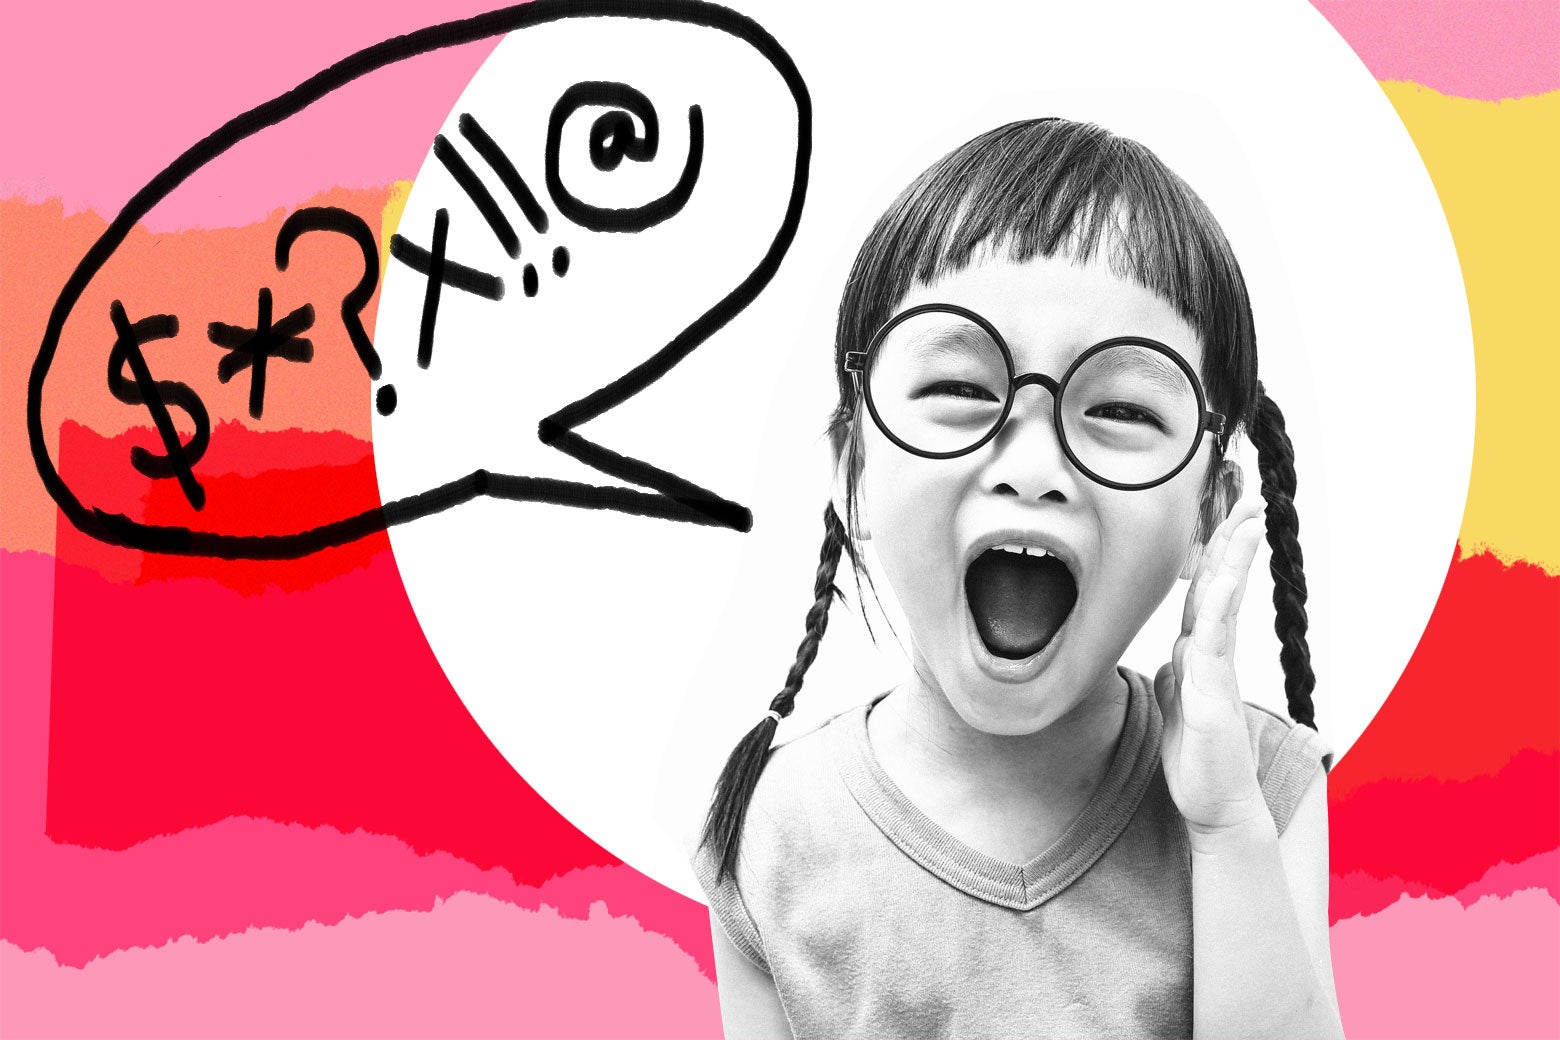 Photo illustration: A young girl with braided pigtails shouts. A speech bubble with suggested swear words has been added to the image.